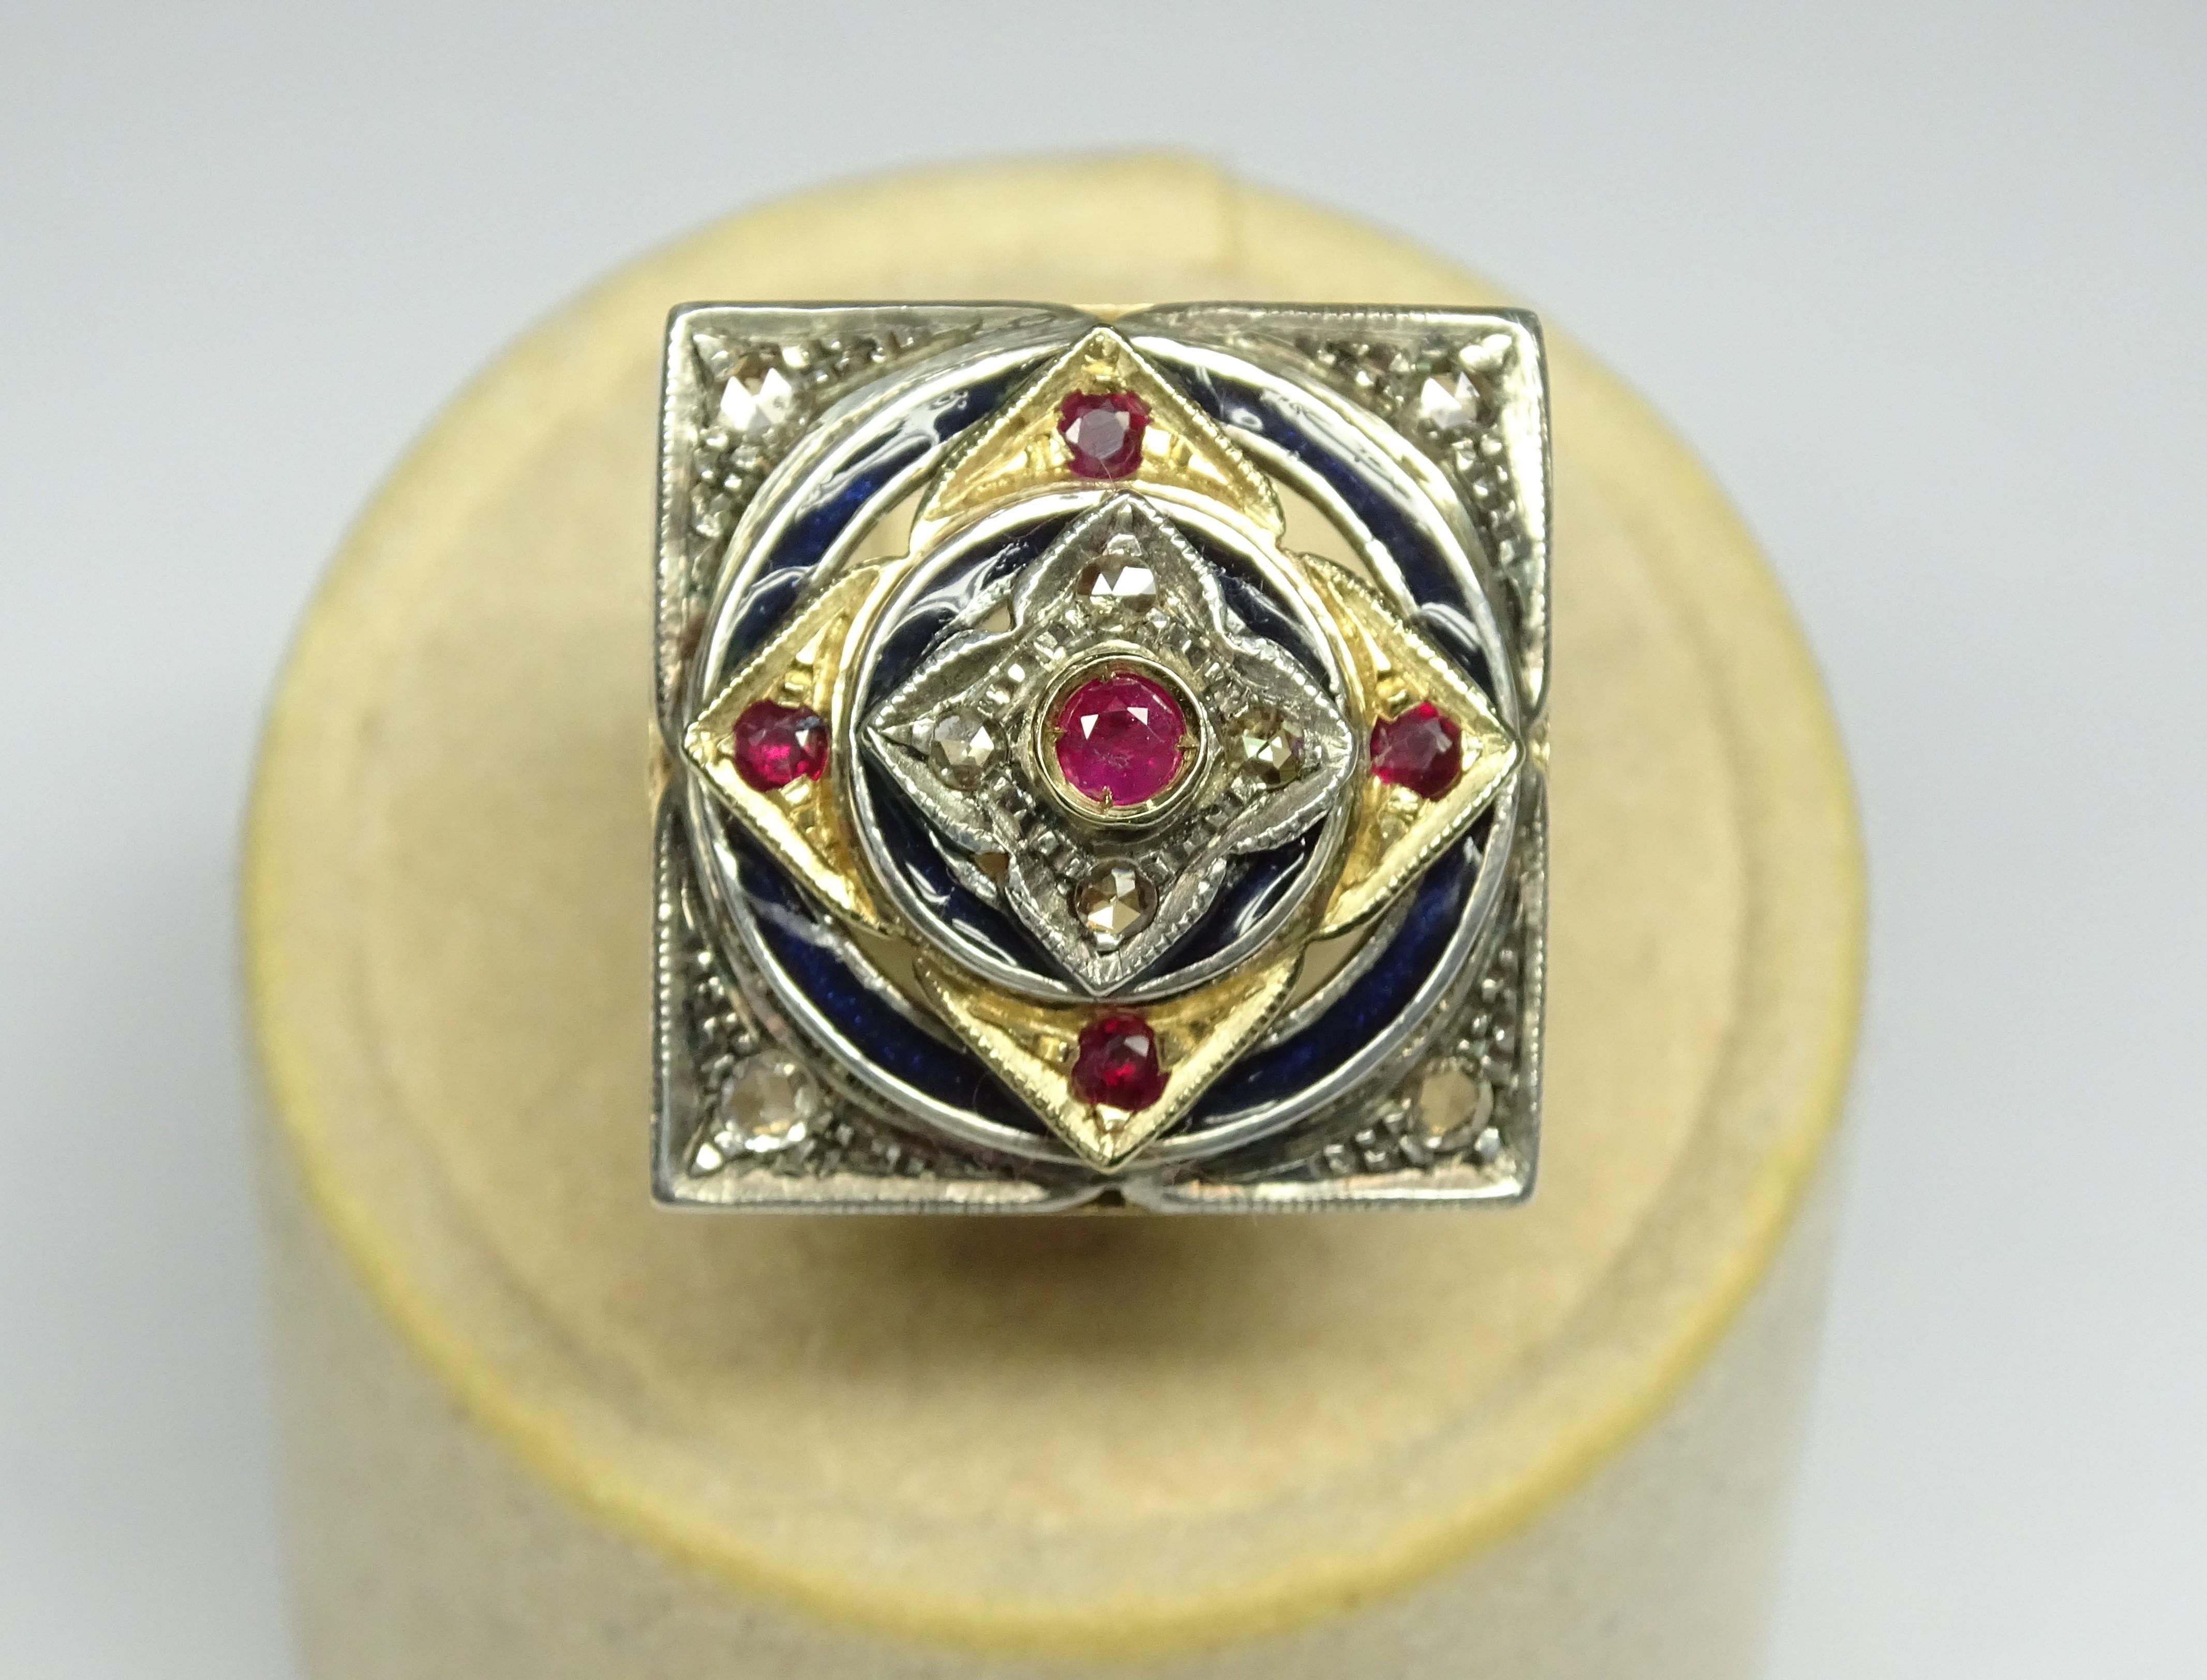 This Ring is made of 14K Yellow Gold and Sterling Silver.
This Ring has 0.28 Carats of Rose Cut Diamonds.
This Ring has 0.35 Carats of Ruby.
This Ring has Dark Blue Enamel.
This Ring is inspired by Art Nouveau.
Size ITA: 15.5 - Size USA: 7.5
We're a